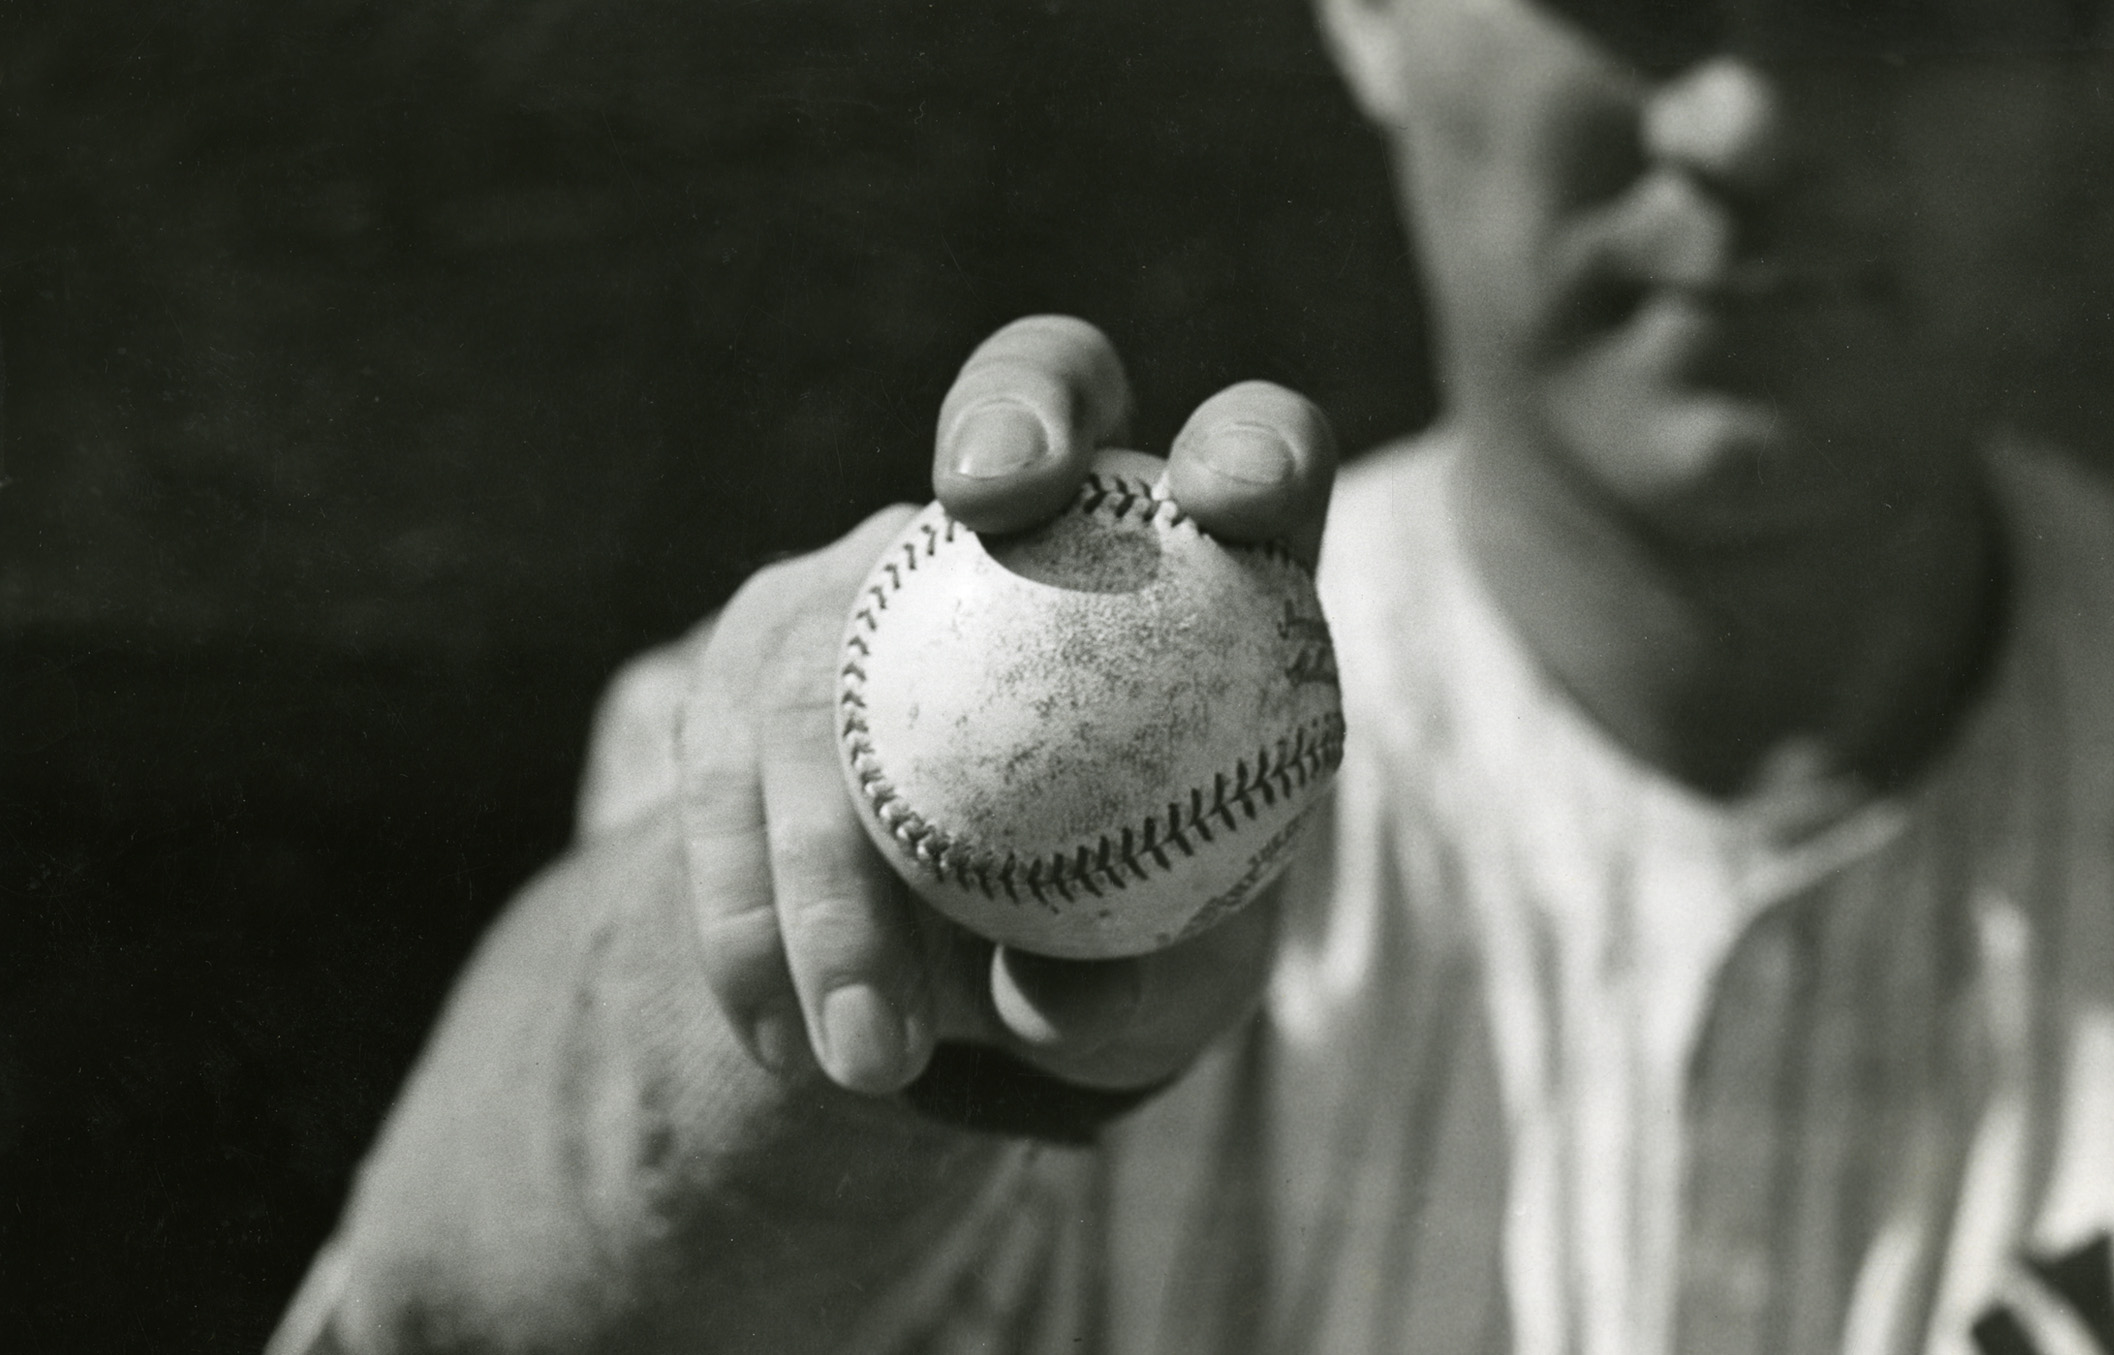 Image credit: "Red Ruffing’s fastball grip (detail)" by William C. Greene, c. 1938, 17 1⁄2” H x 21 1⁄2” W, PAP.28 See less